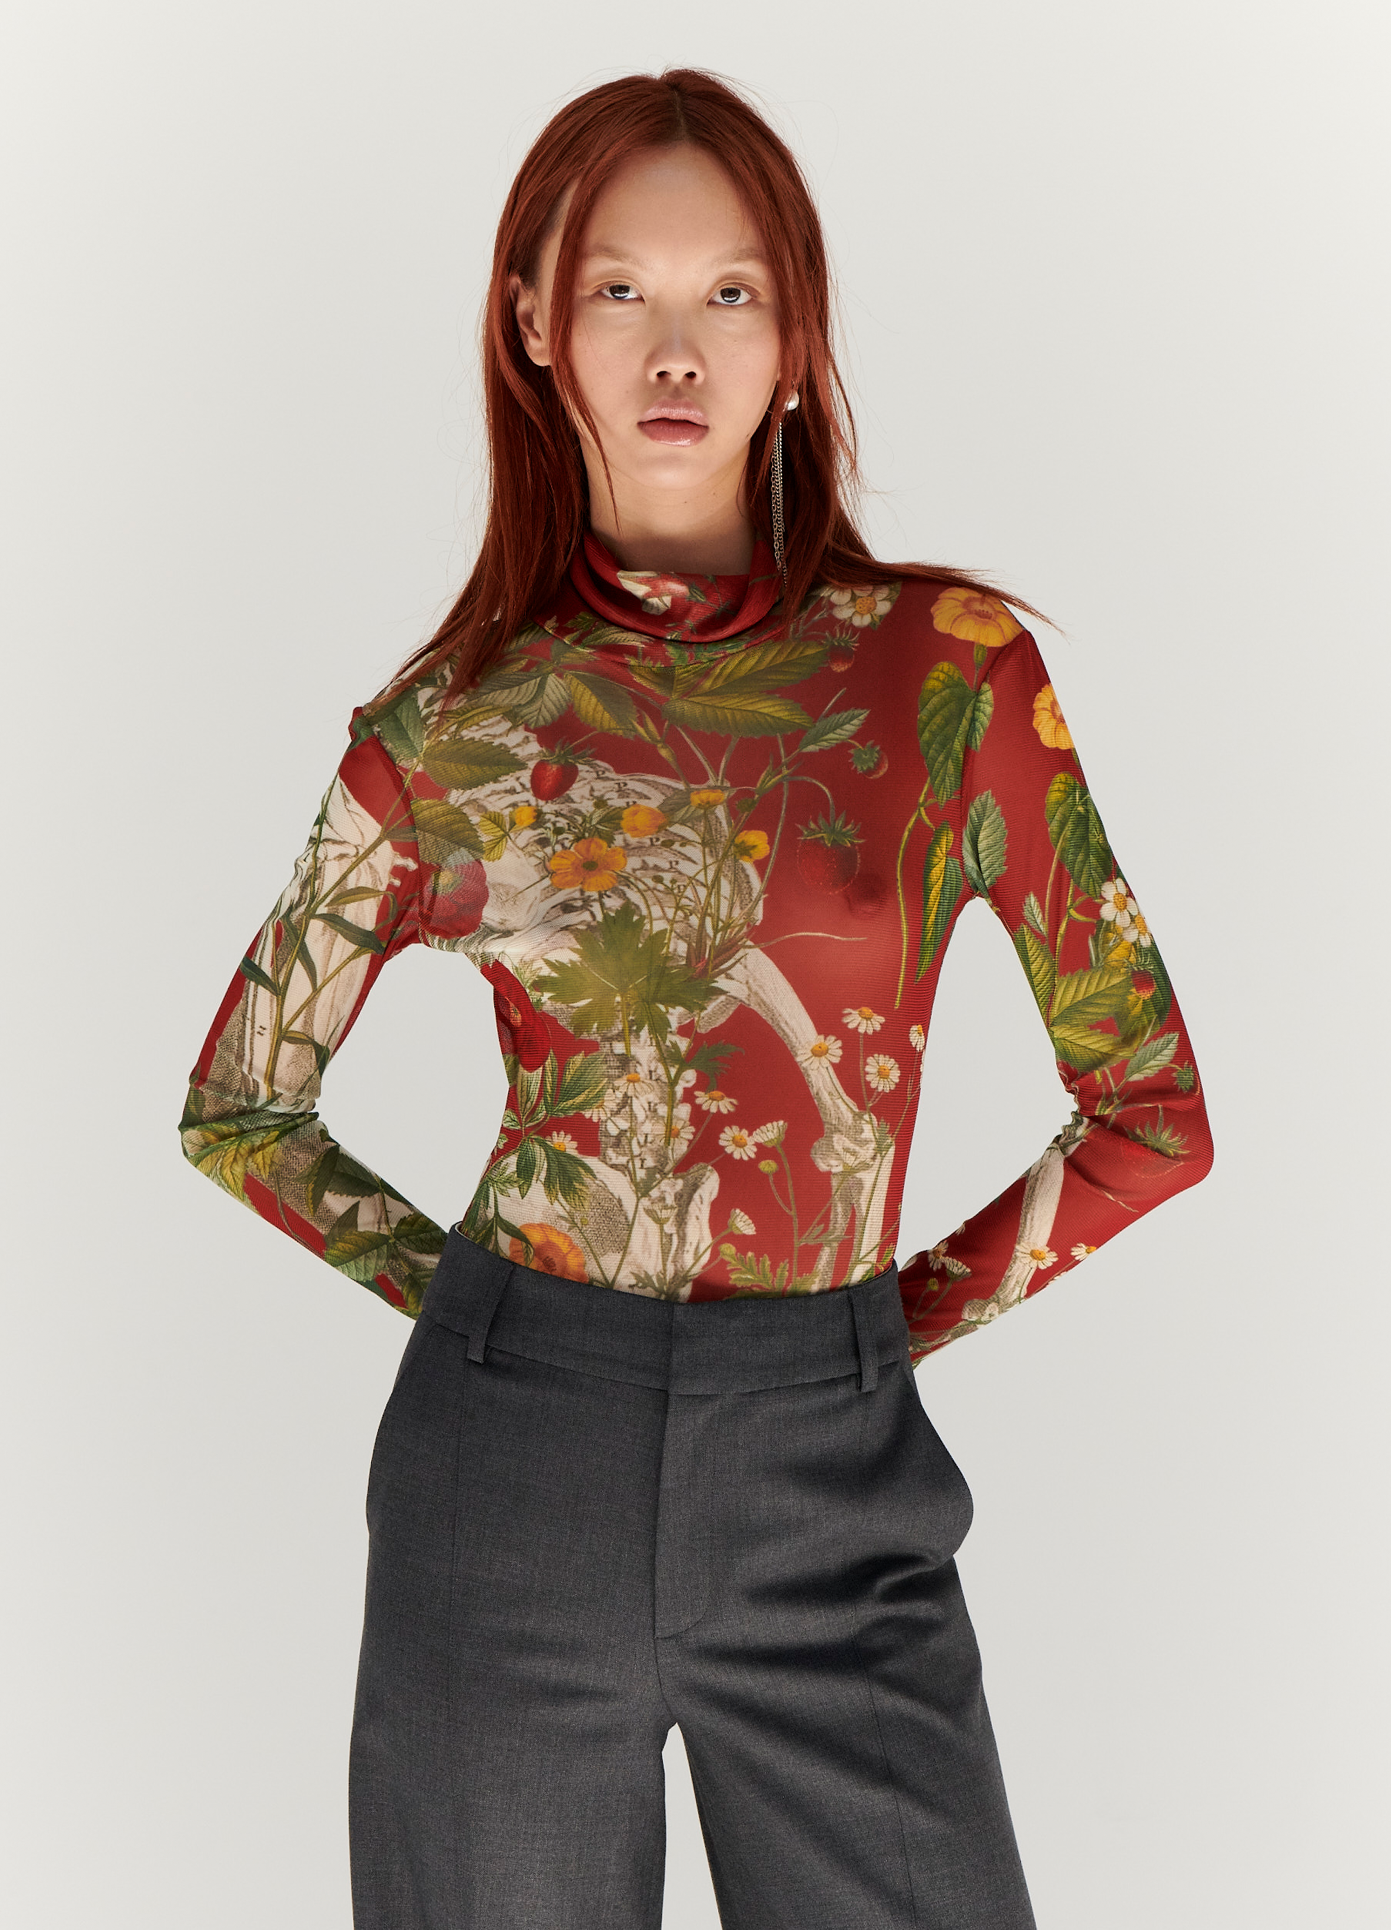 MONSE Floral Skeleton Print Mesh Turtleneck in Red Multi on model with hands behind back front view